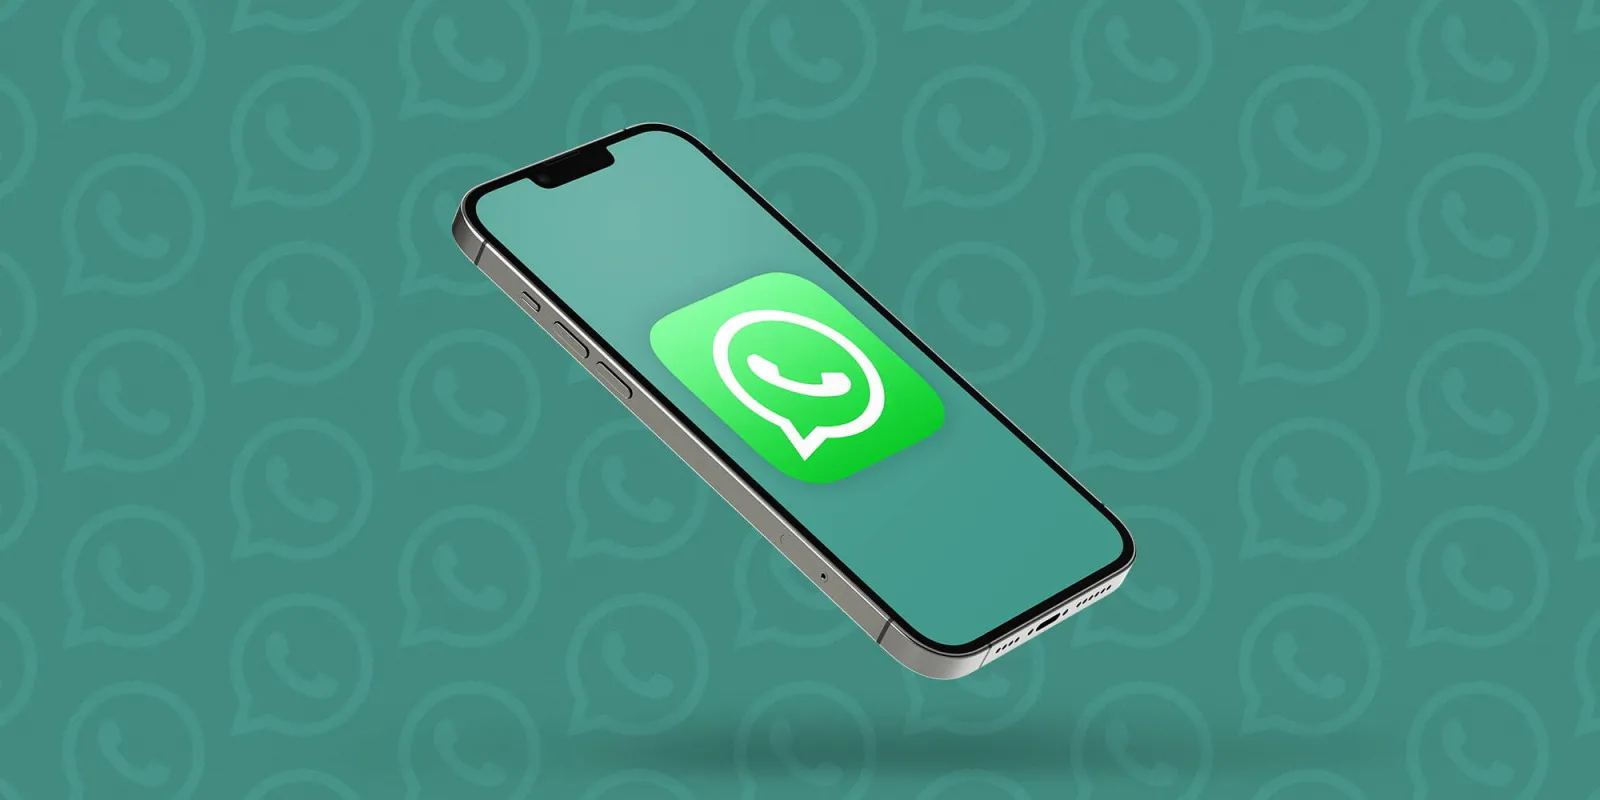 WhatsApp Rolls Out Exciting New Features for iPhone Users